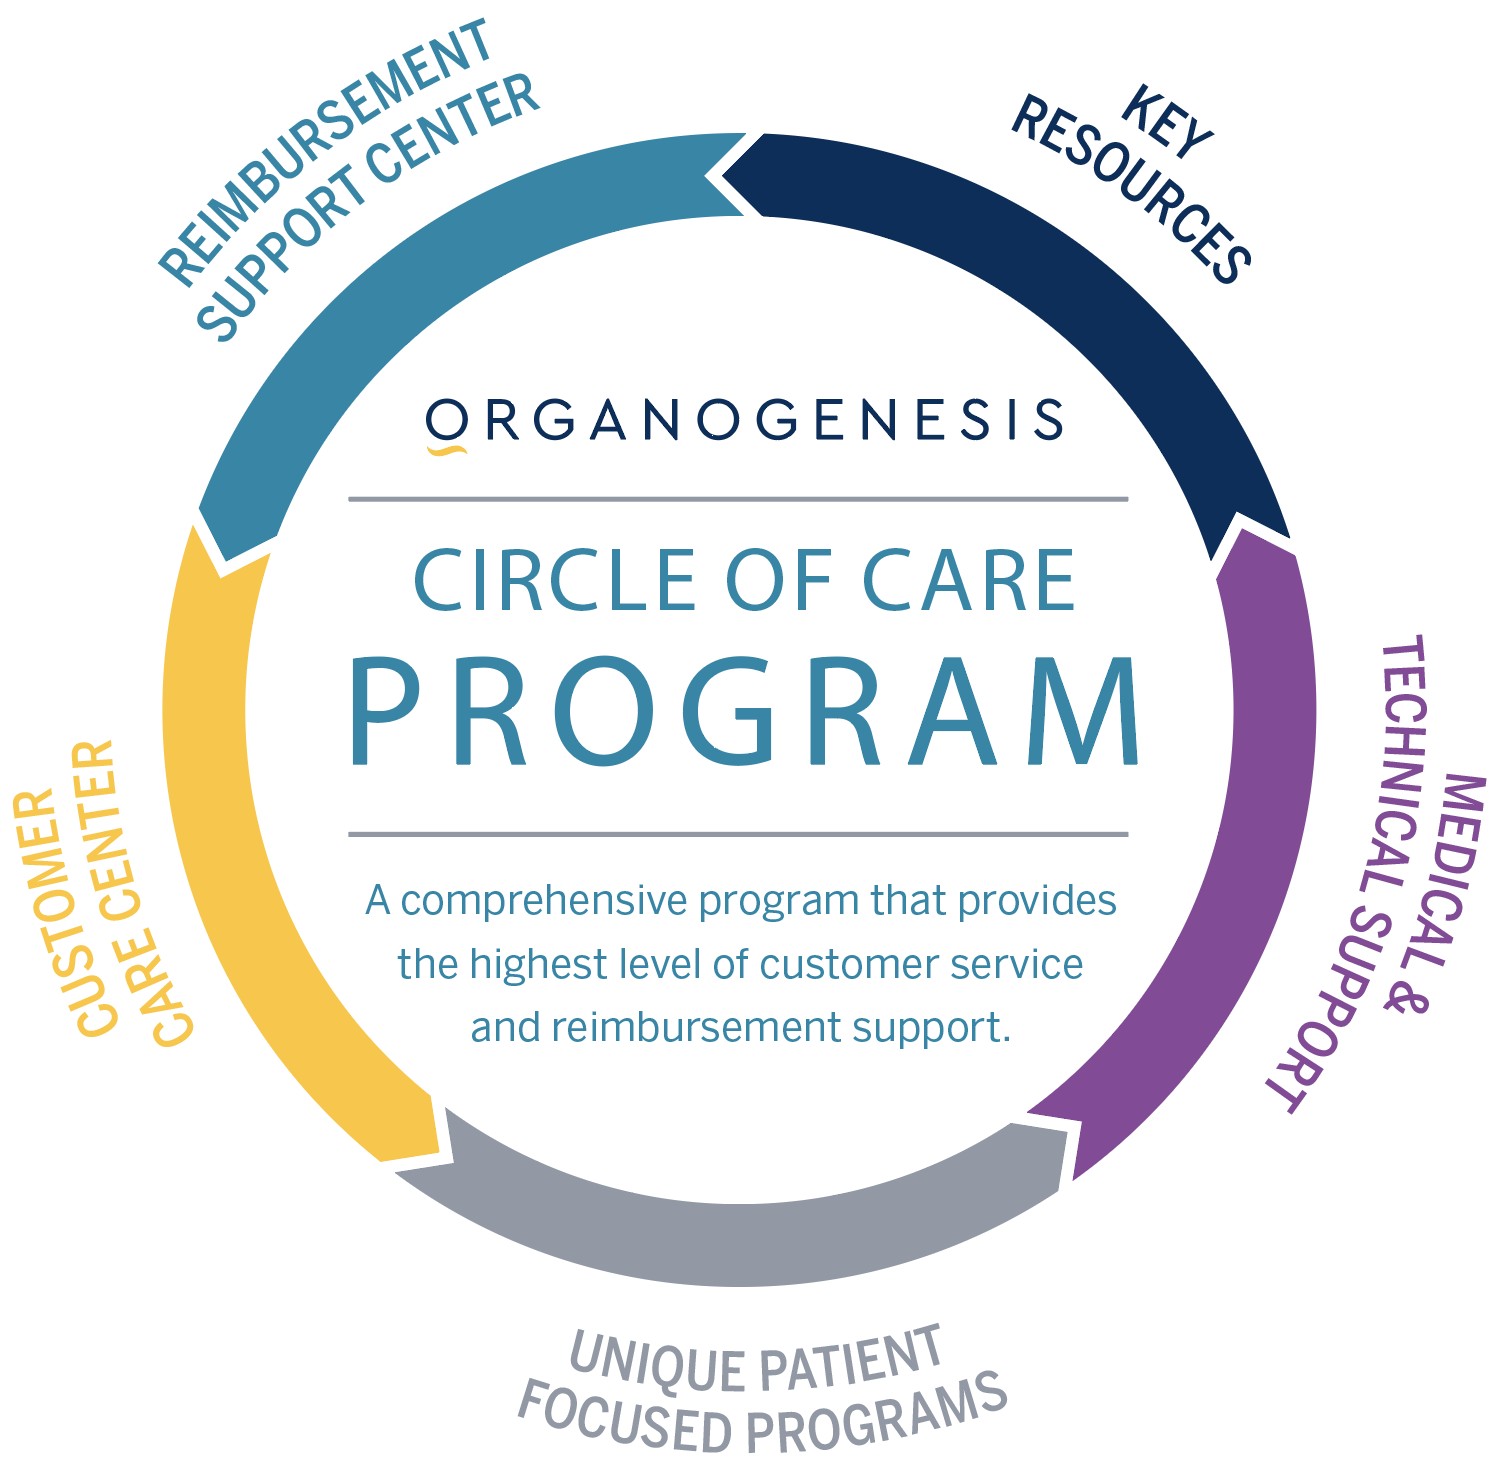 Components that make up the Organogenesis Circle of Care program